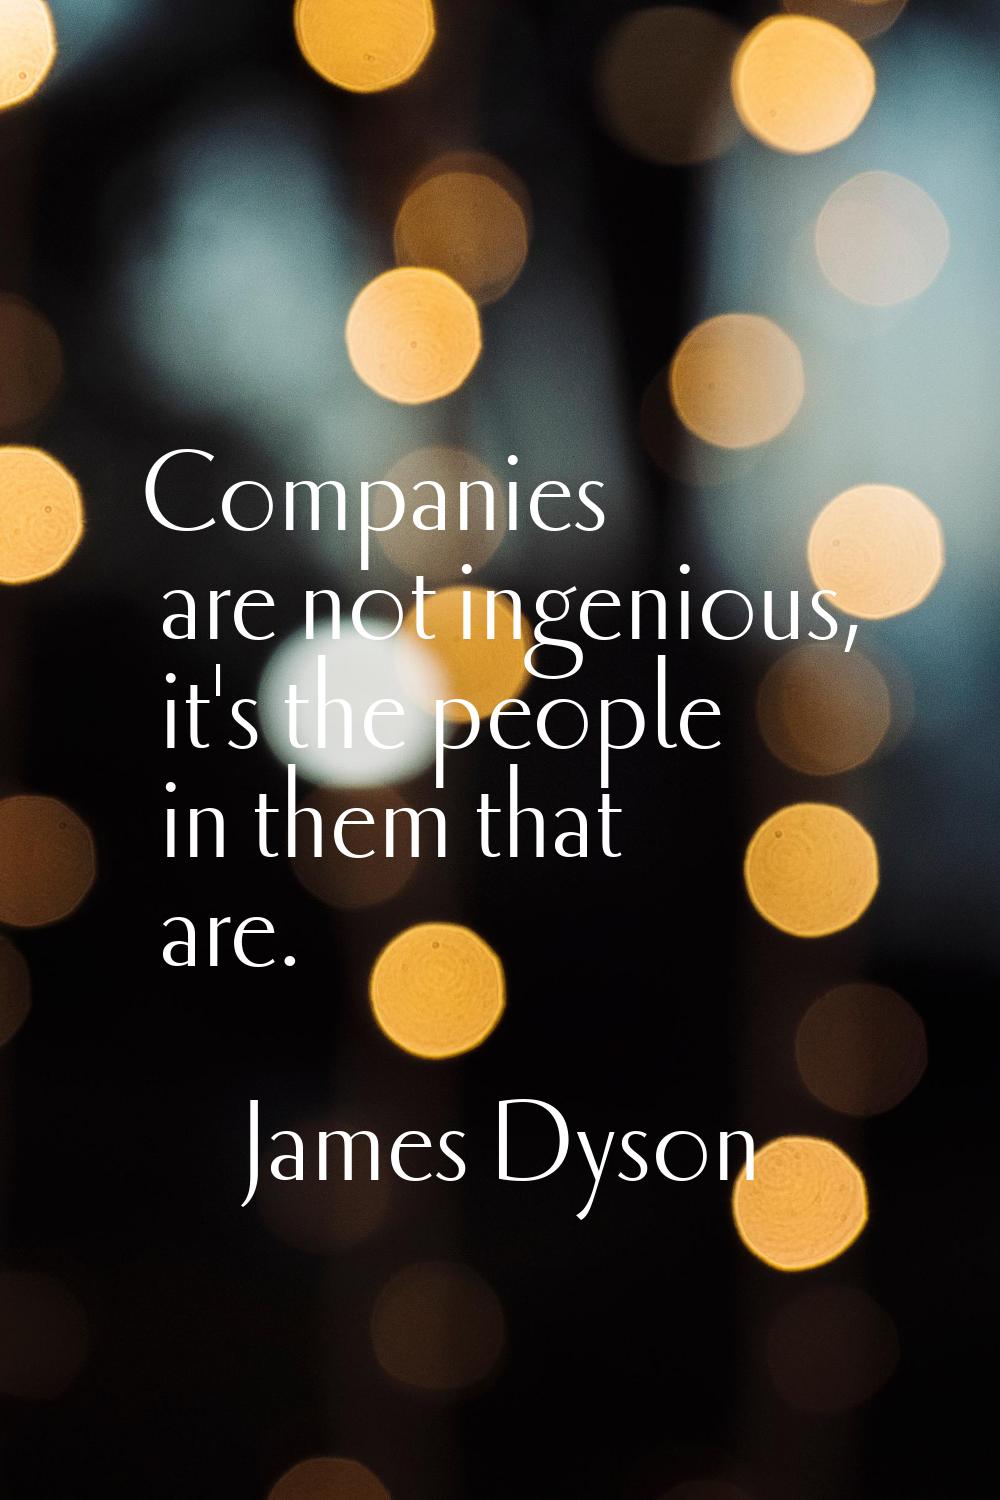 Companies are not ingenious, it's the people in them that are.